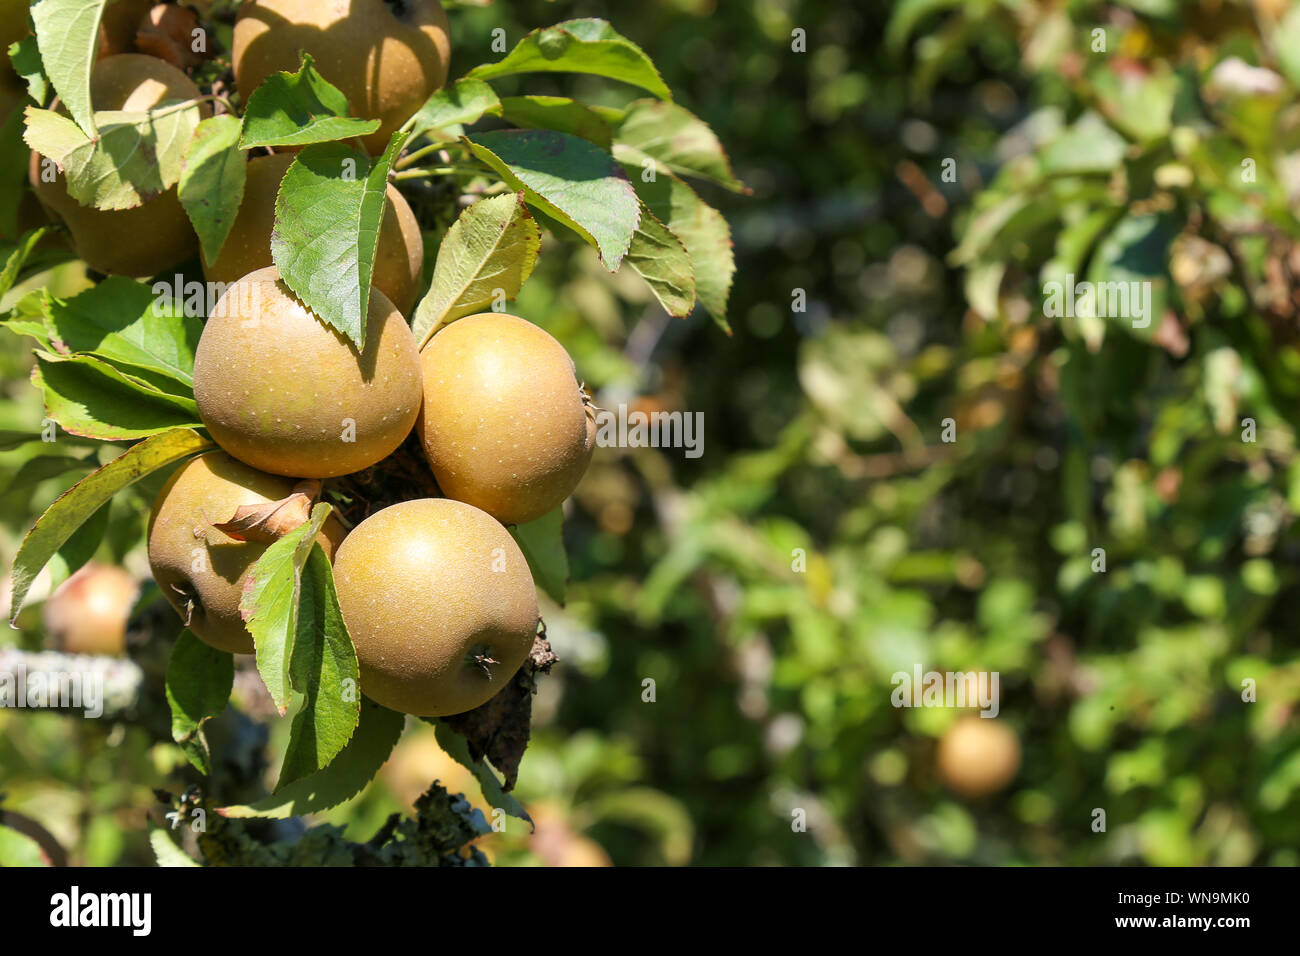 Crab apple tree (Malus sylvestris) laden with apples in summer Stock Photo